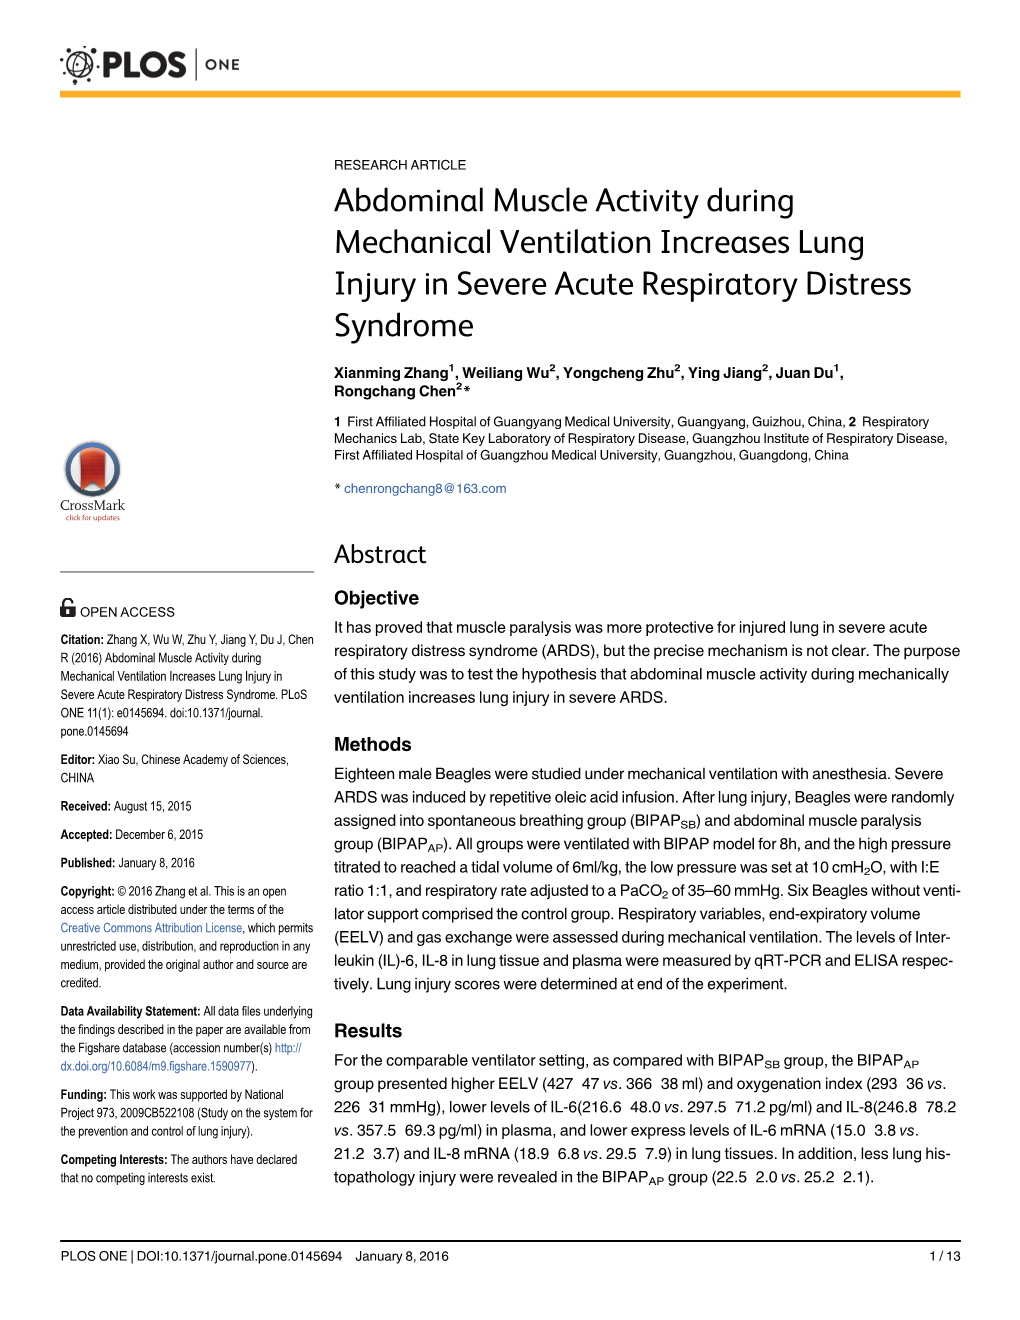 Abdominal Muscle Activity During Mechanically Ventilation Increases Lung Injury in Severe Acute Respiratory Distress Syndrome